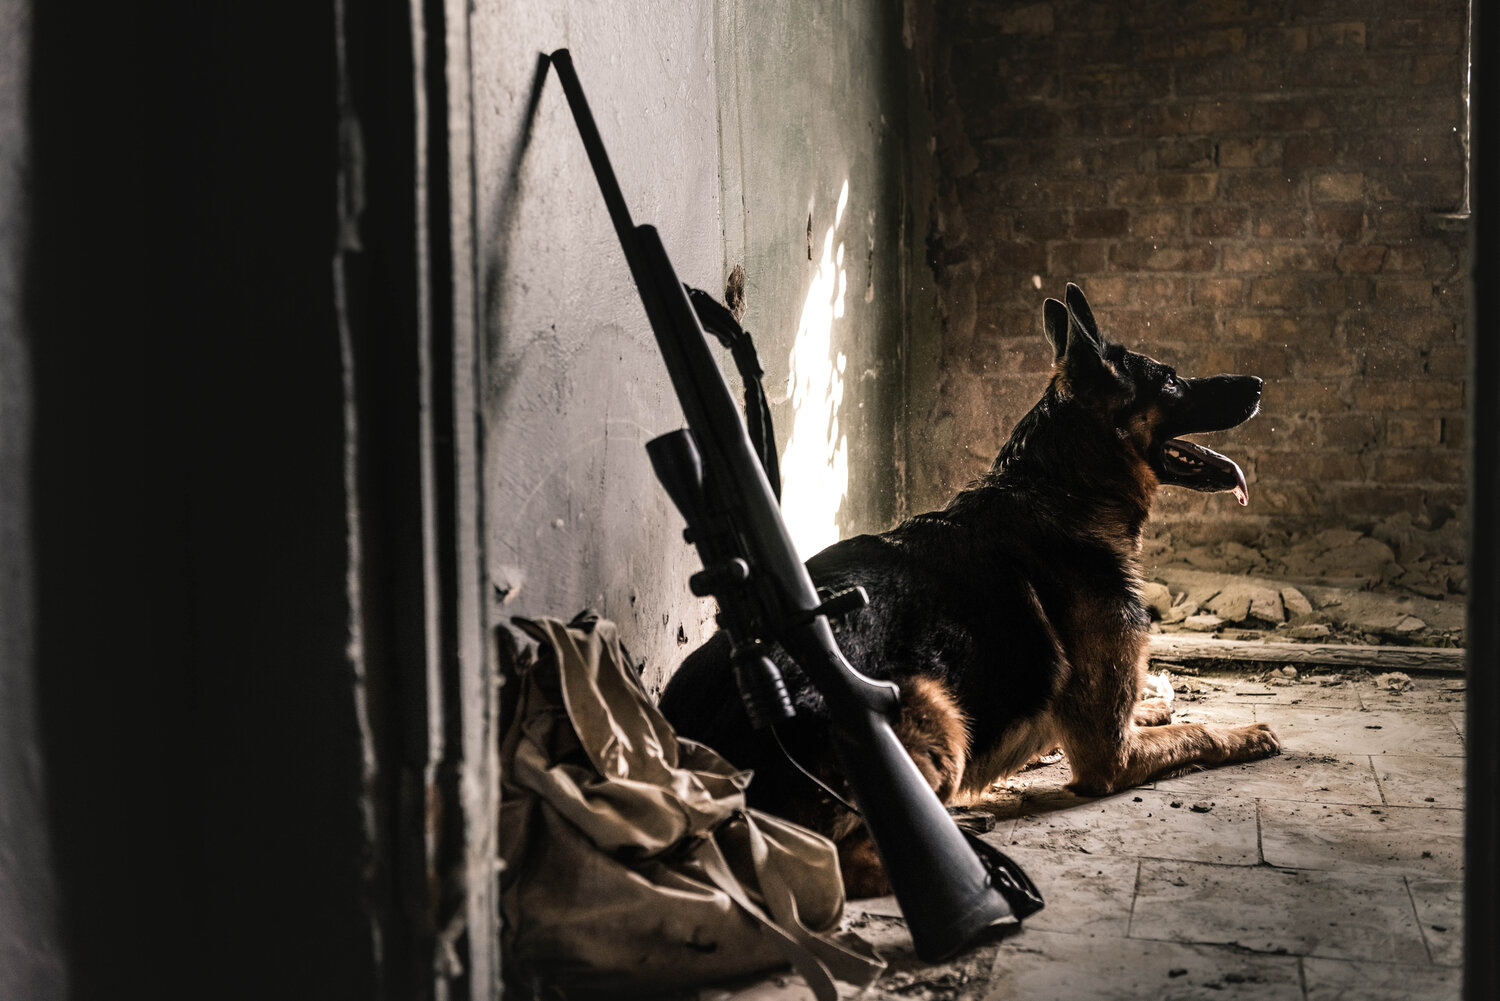 Which Is Better For Home Defense: A Gun Or A German Shepherd